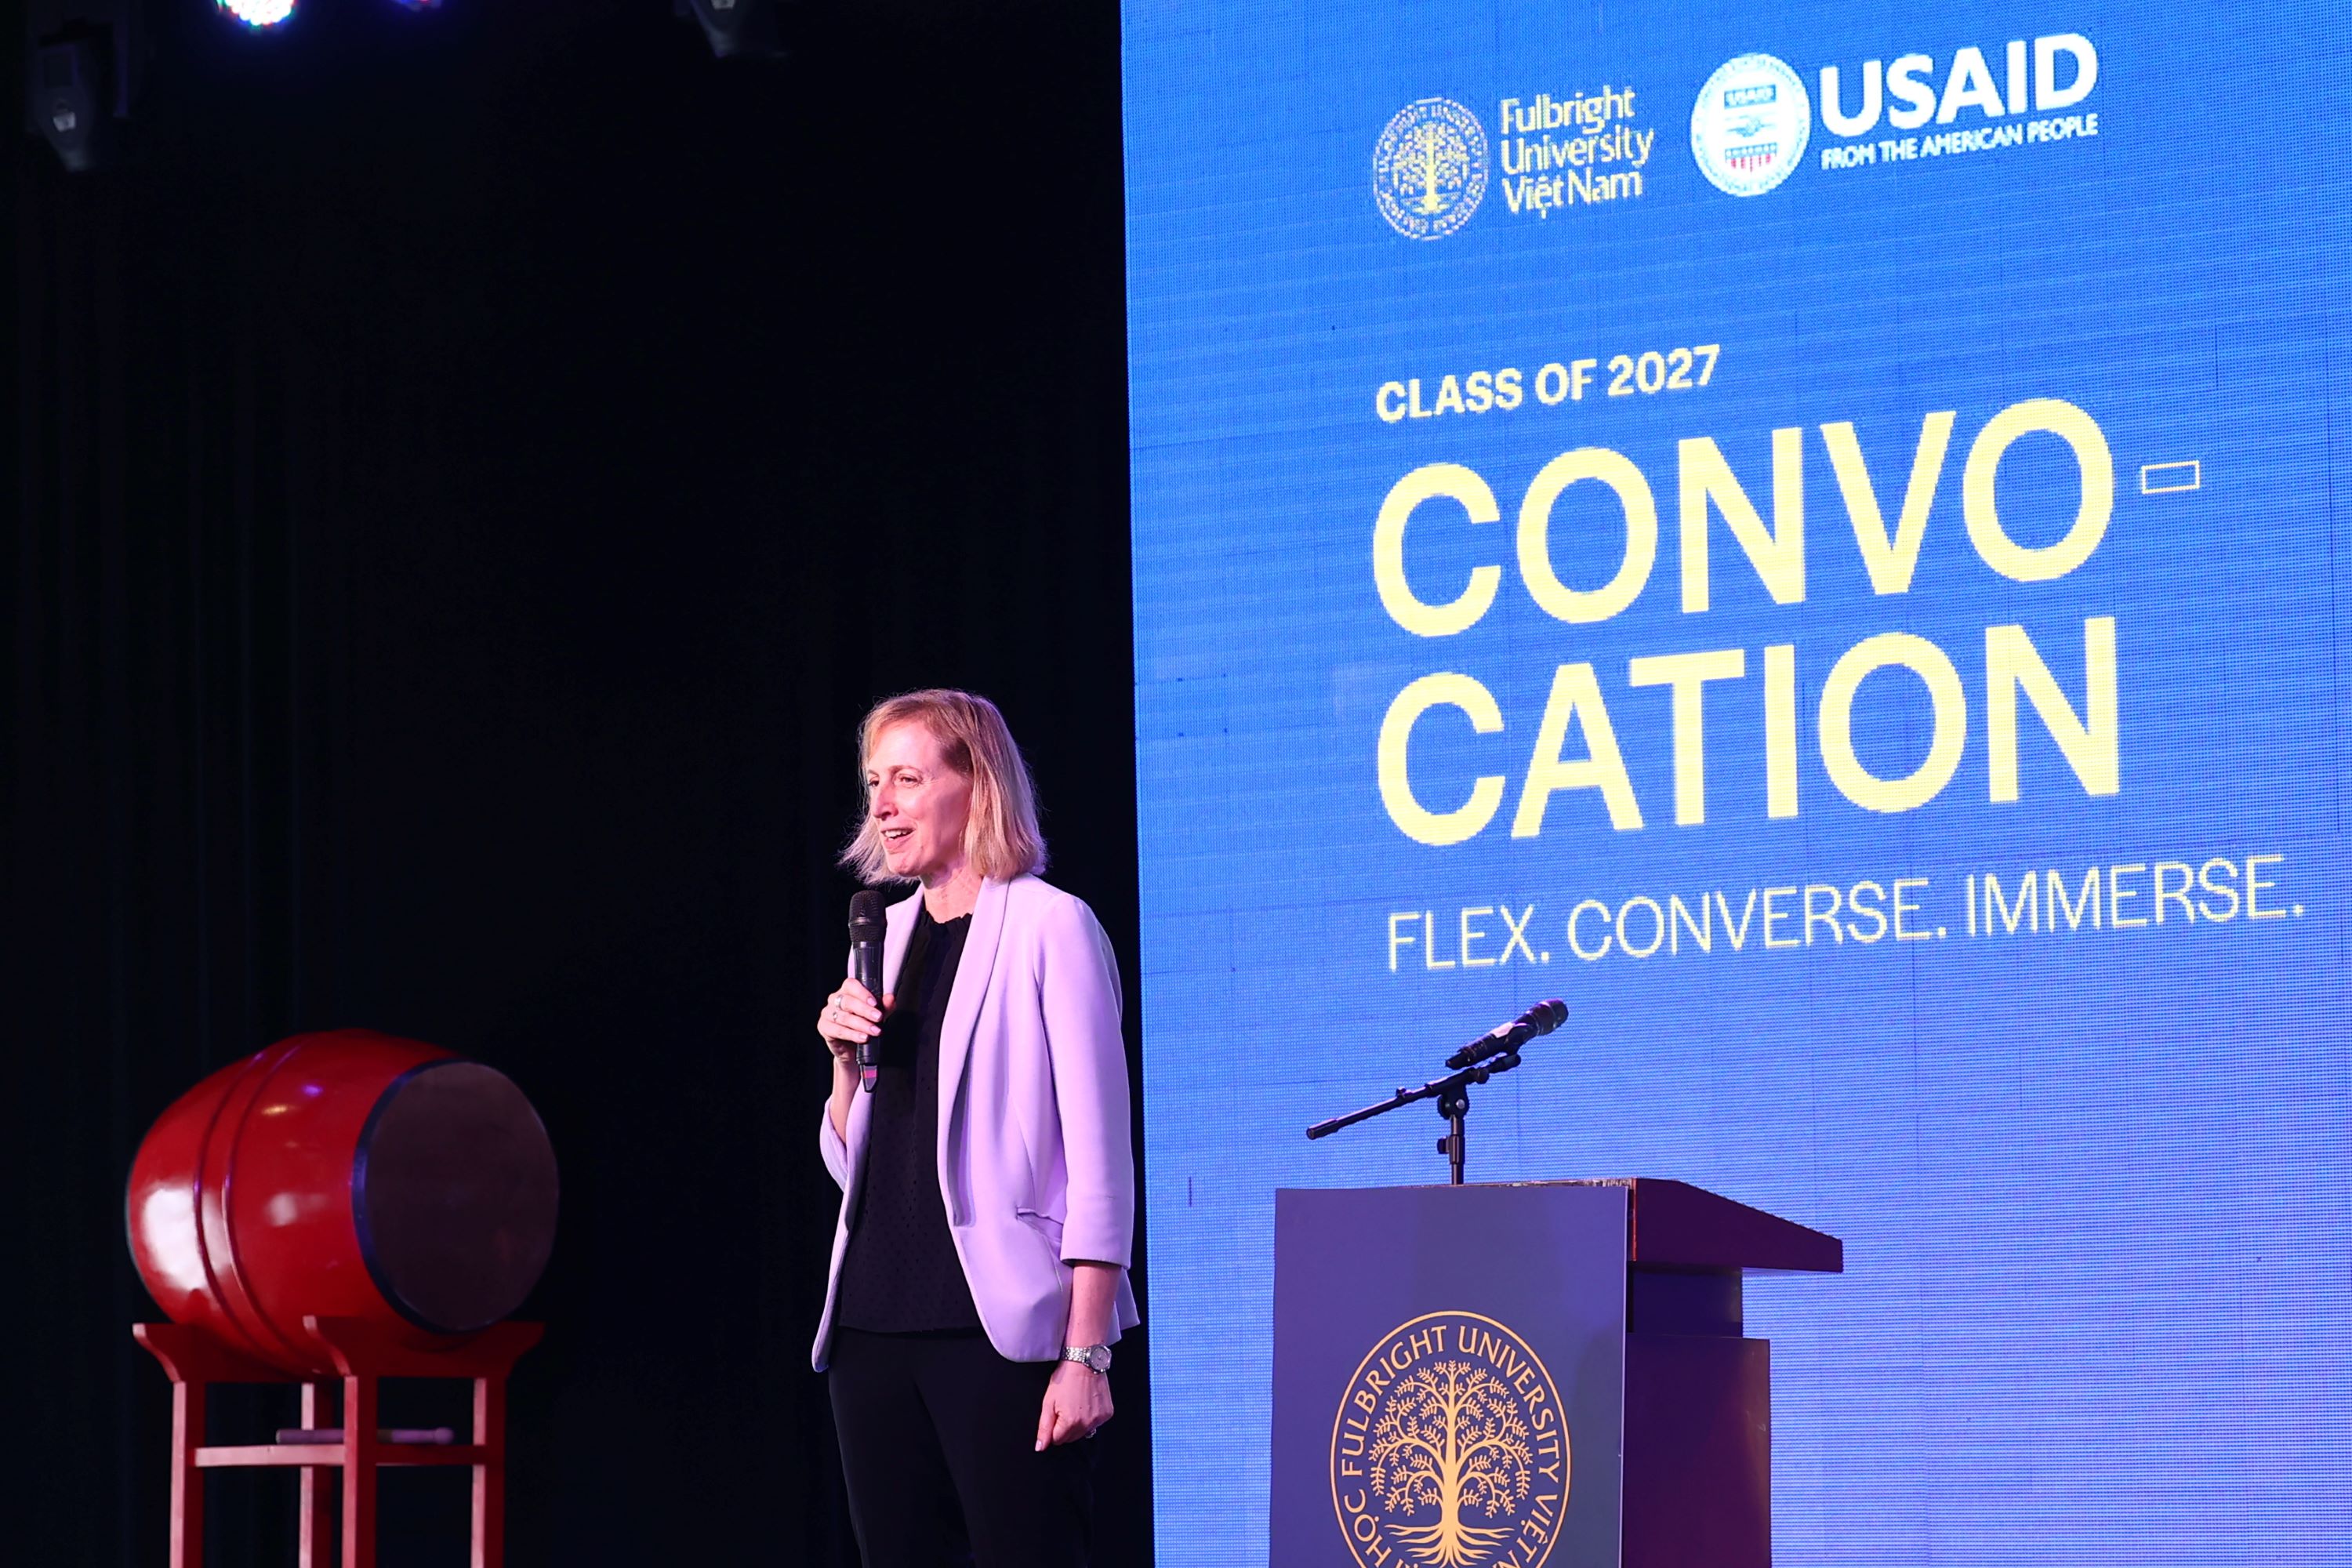 The United States Consul General in Vietnam Ms. Susan Burns encouraged Fulbright freshmen as they took their first steps in their college journey